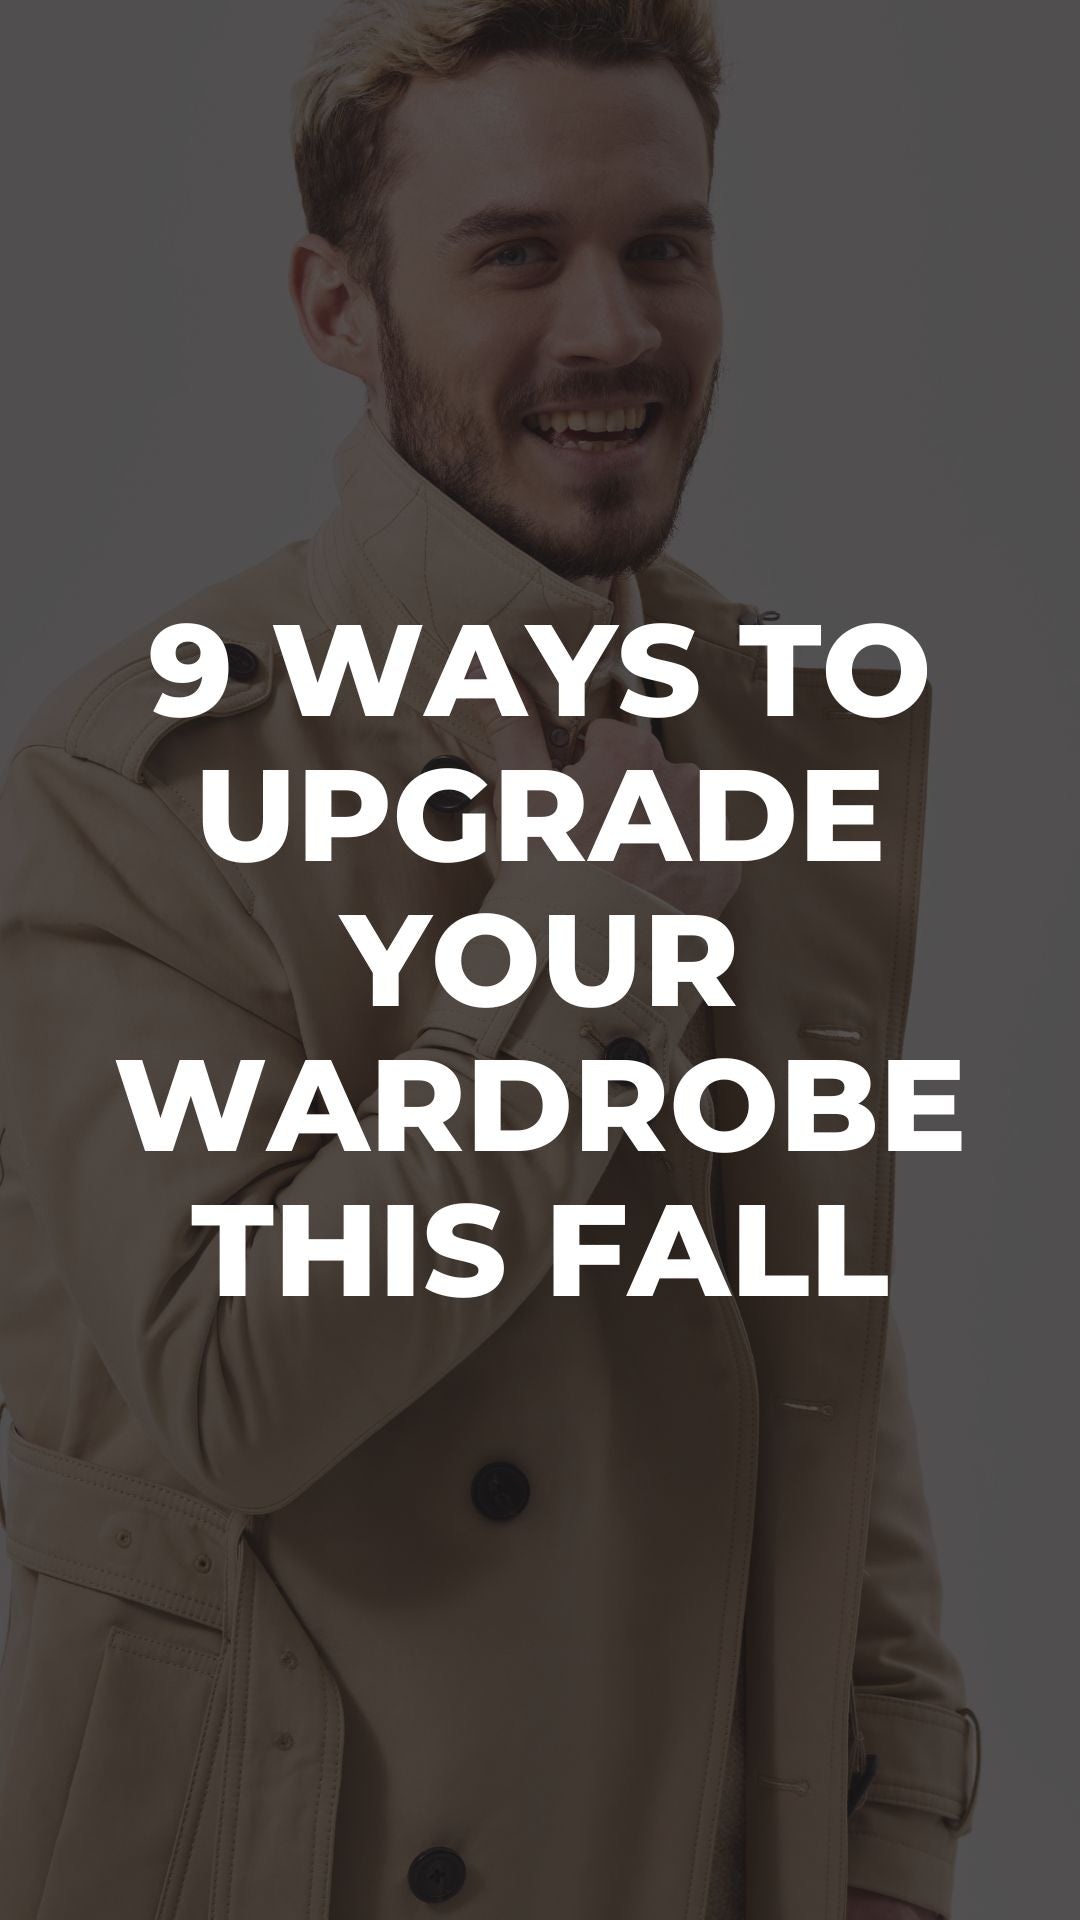 Men’s Fashion: 9 Ways to Upgrade Your Wardrobe This Fall – LIFESTYLE BY PS